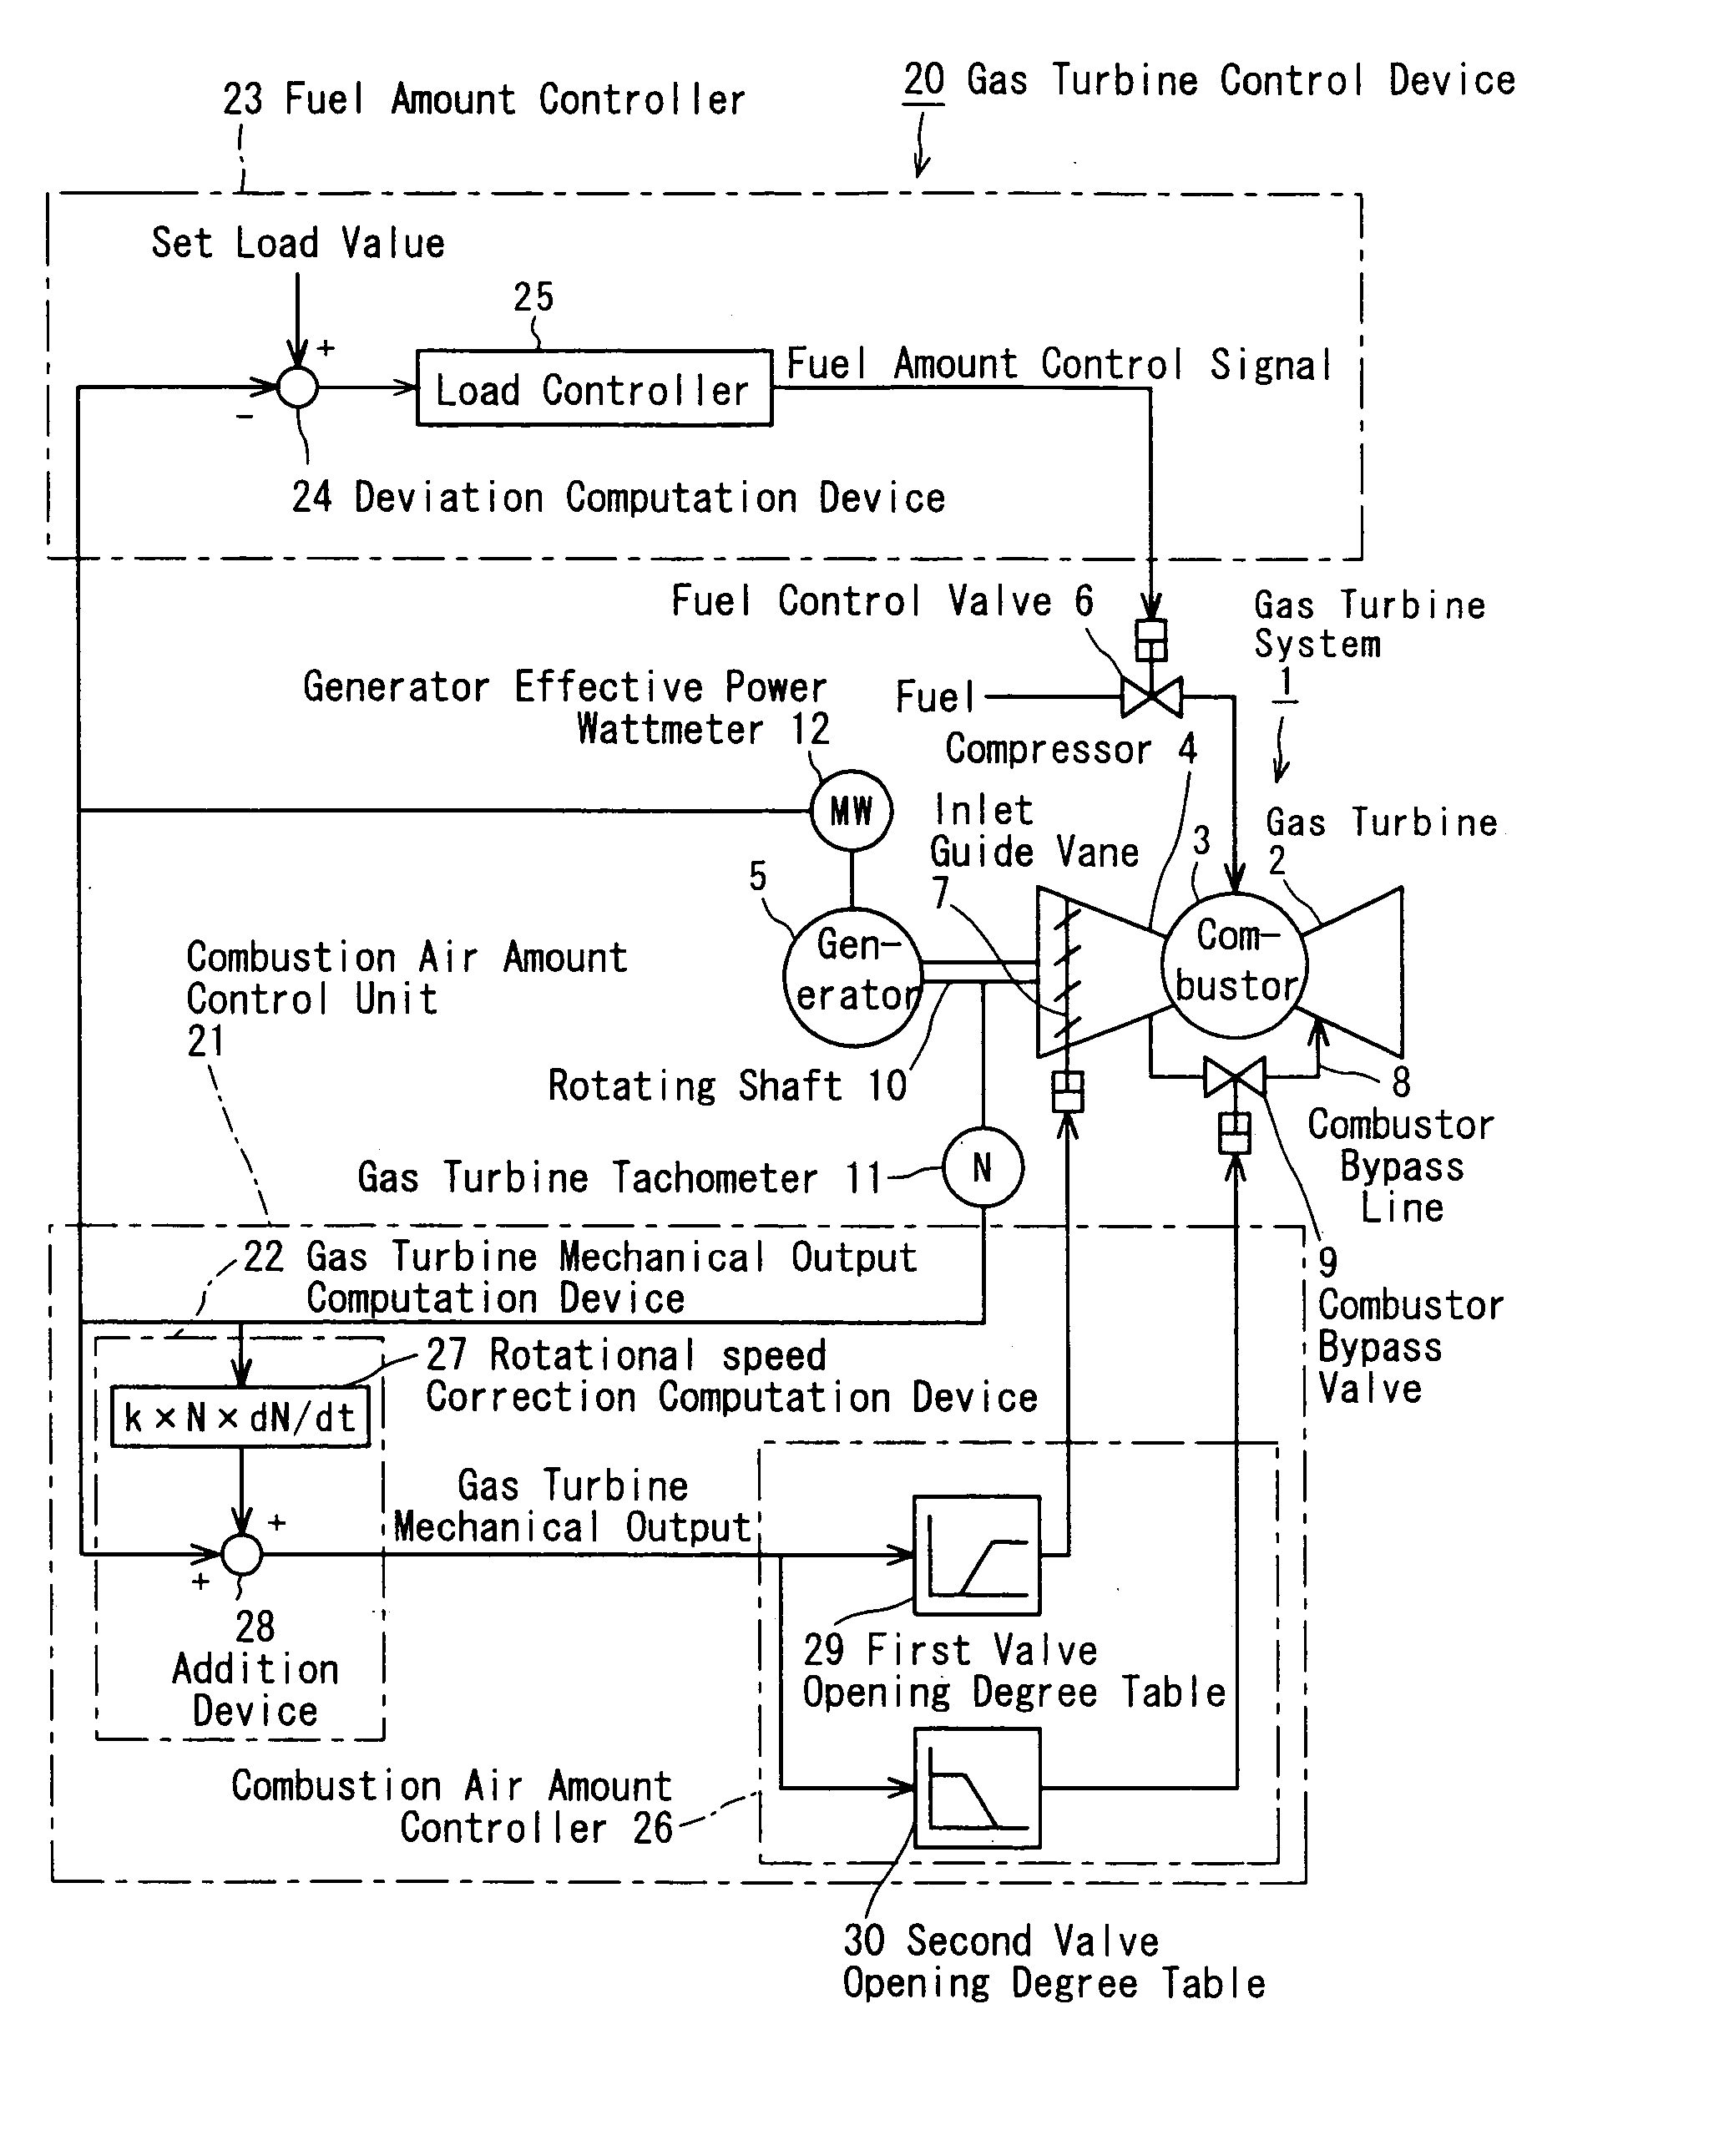 Turbine mechanical output computation device and gas turbine control device equipped therewith